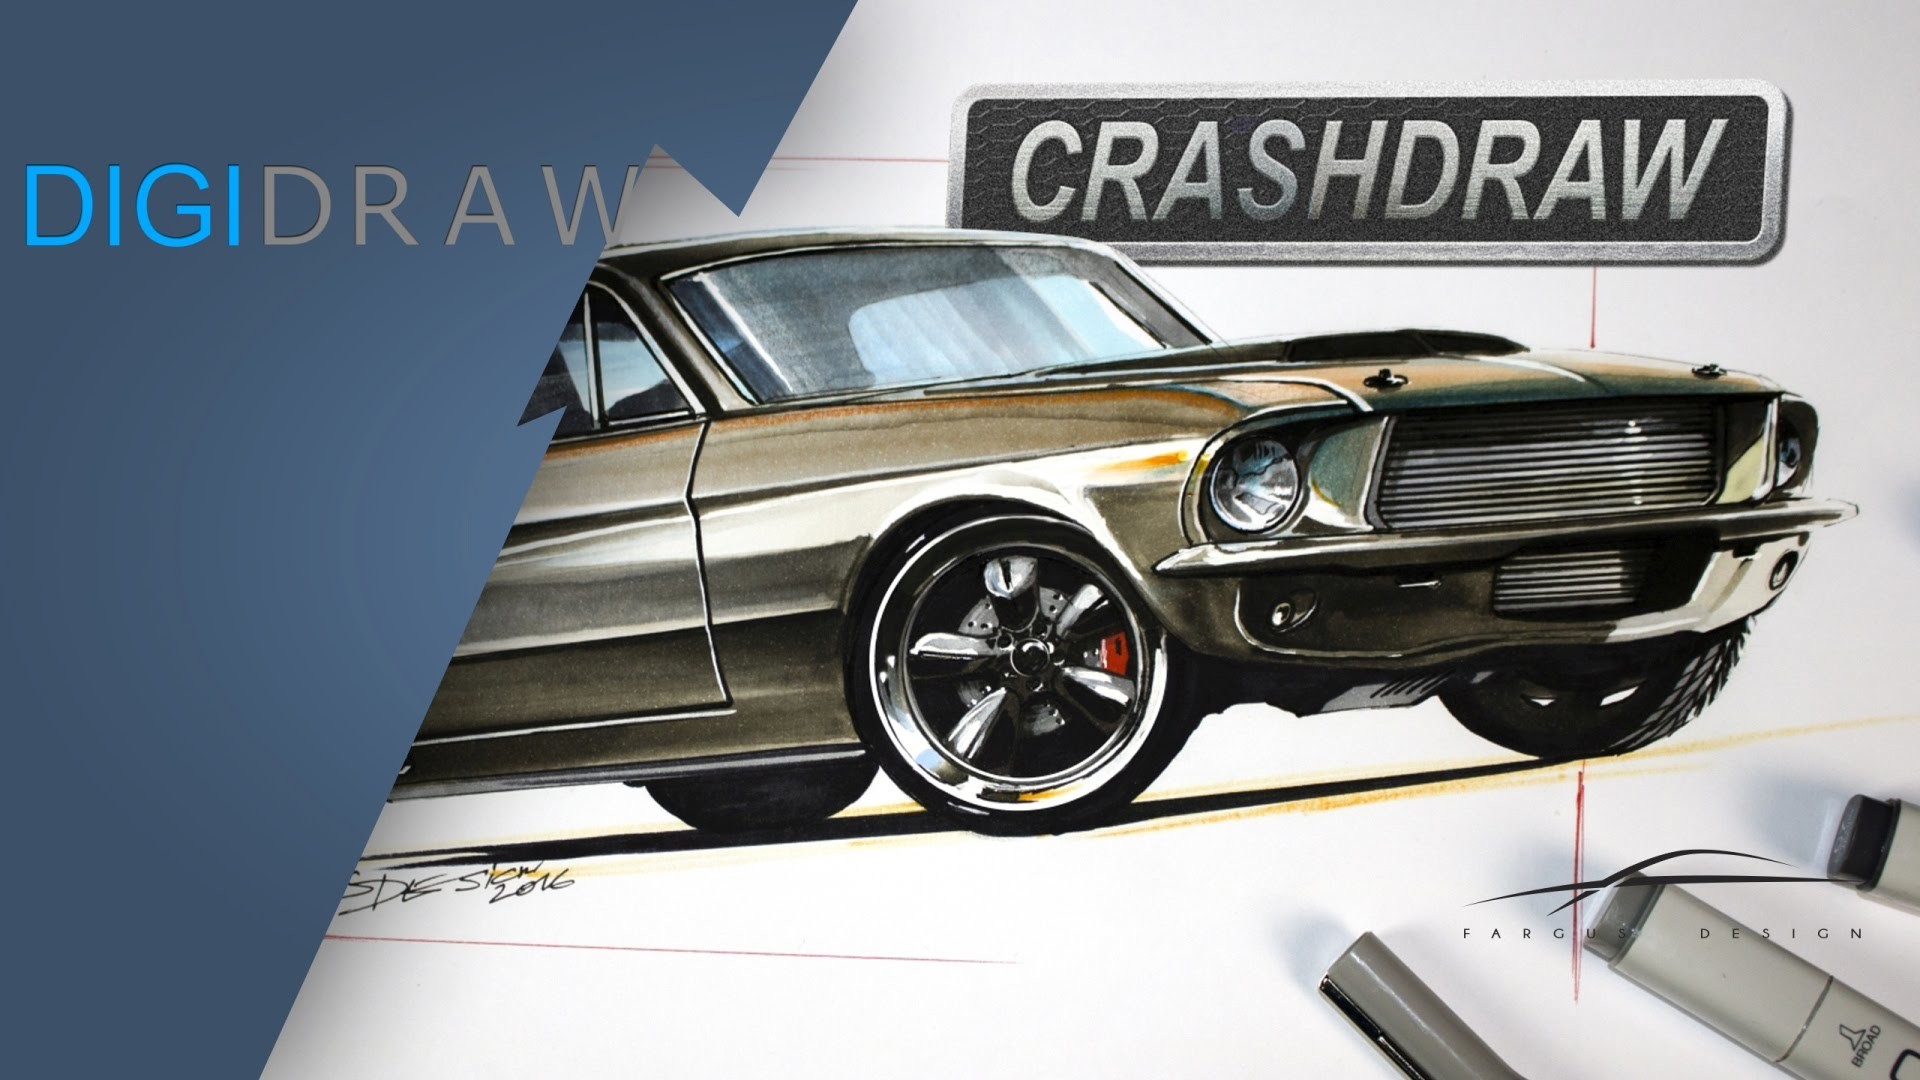 Classic Ford Bronco Gets a Redesign Sketch from Chip Foose  autoevolution